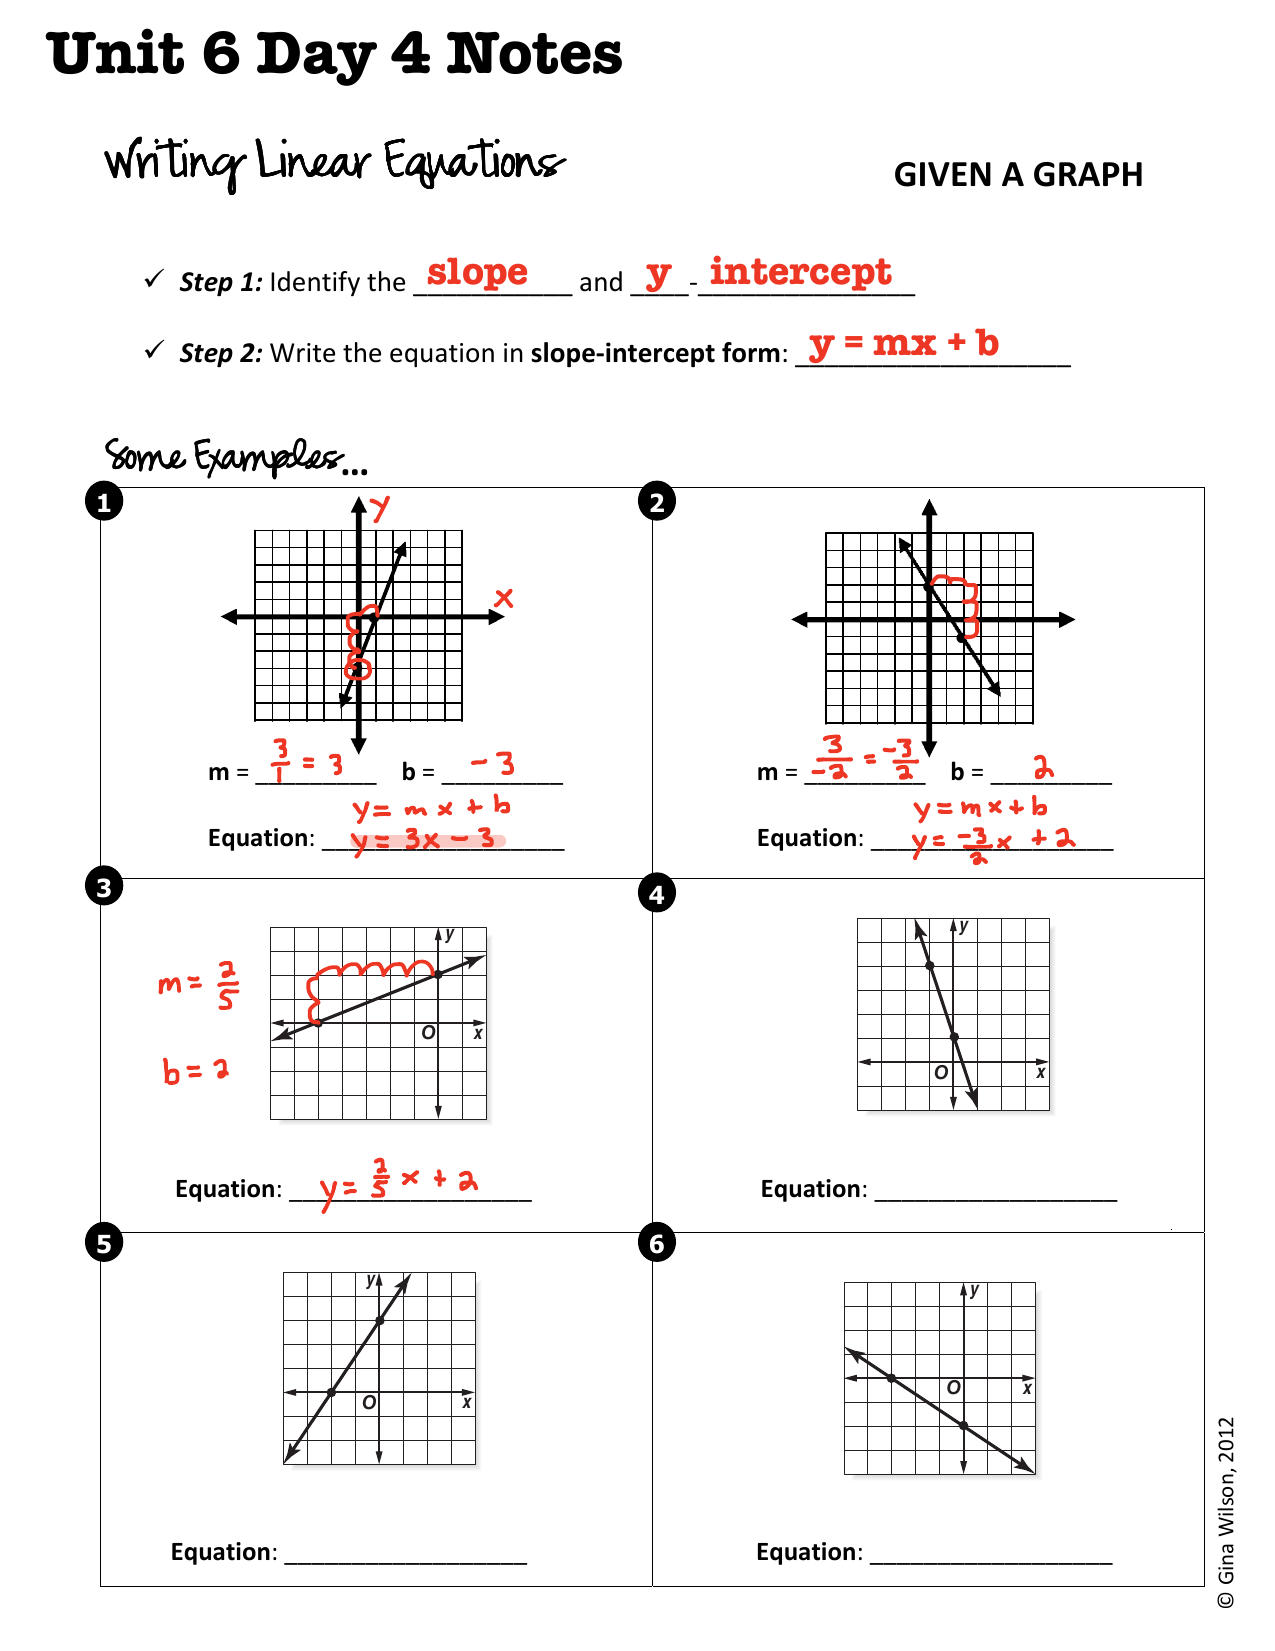 Writing Linear Equations With Graphing Linear Equations Practice Worksheet